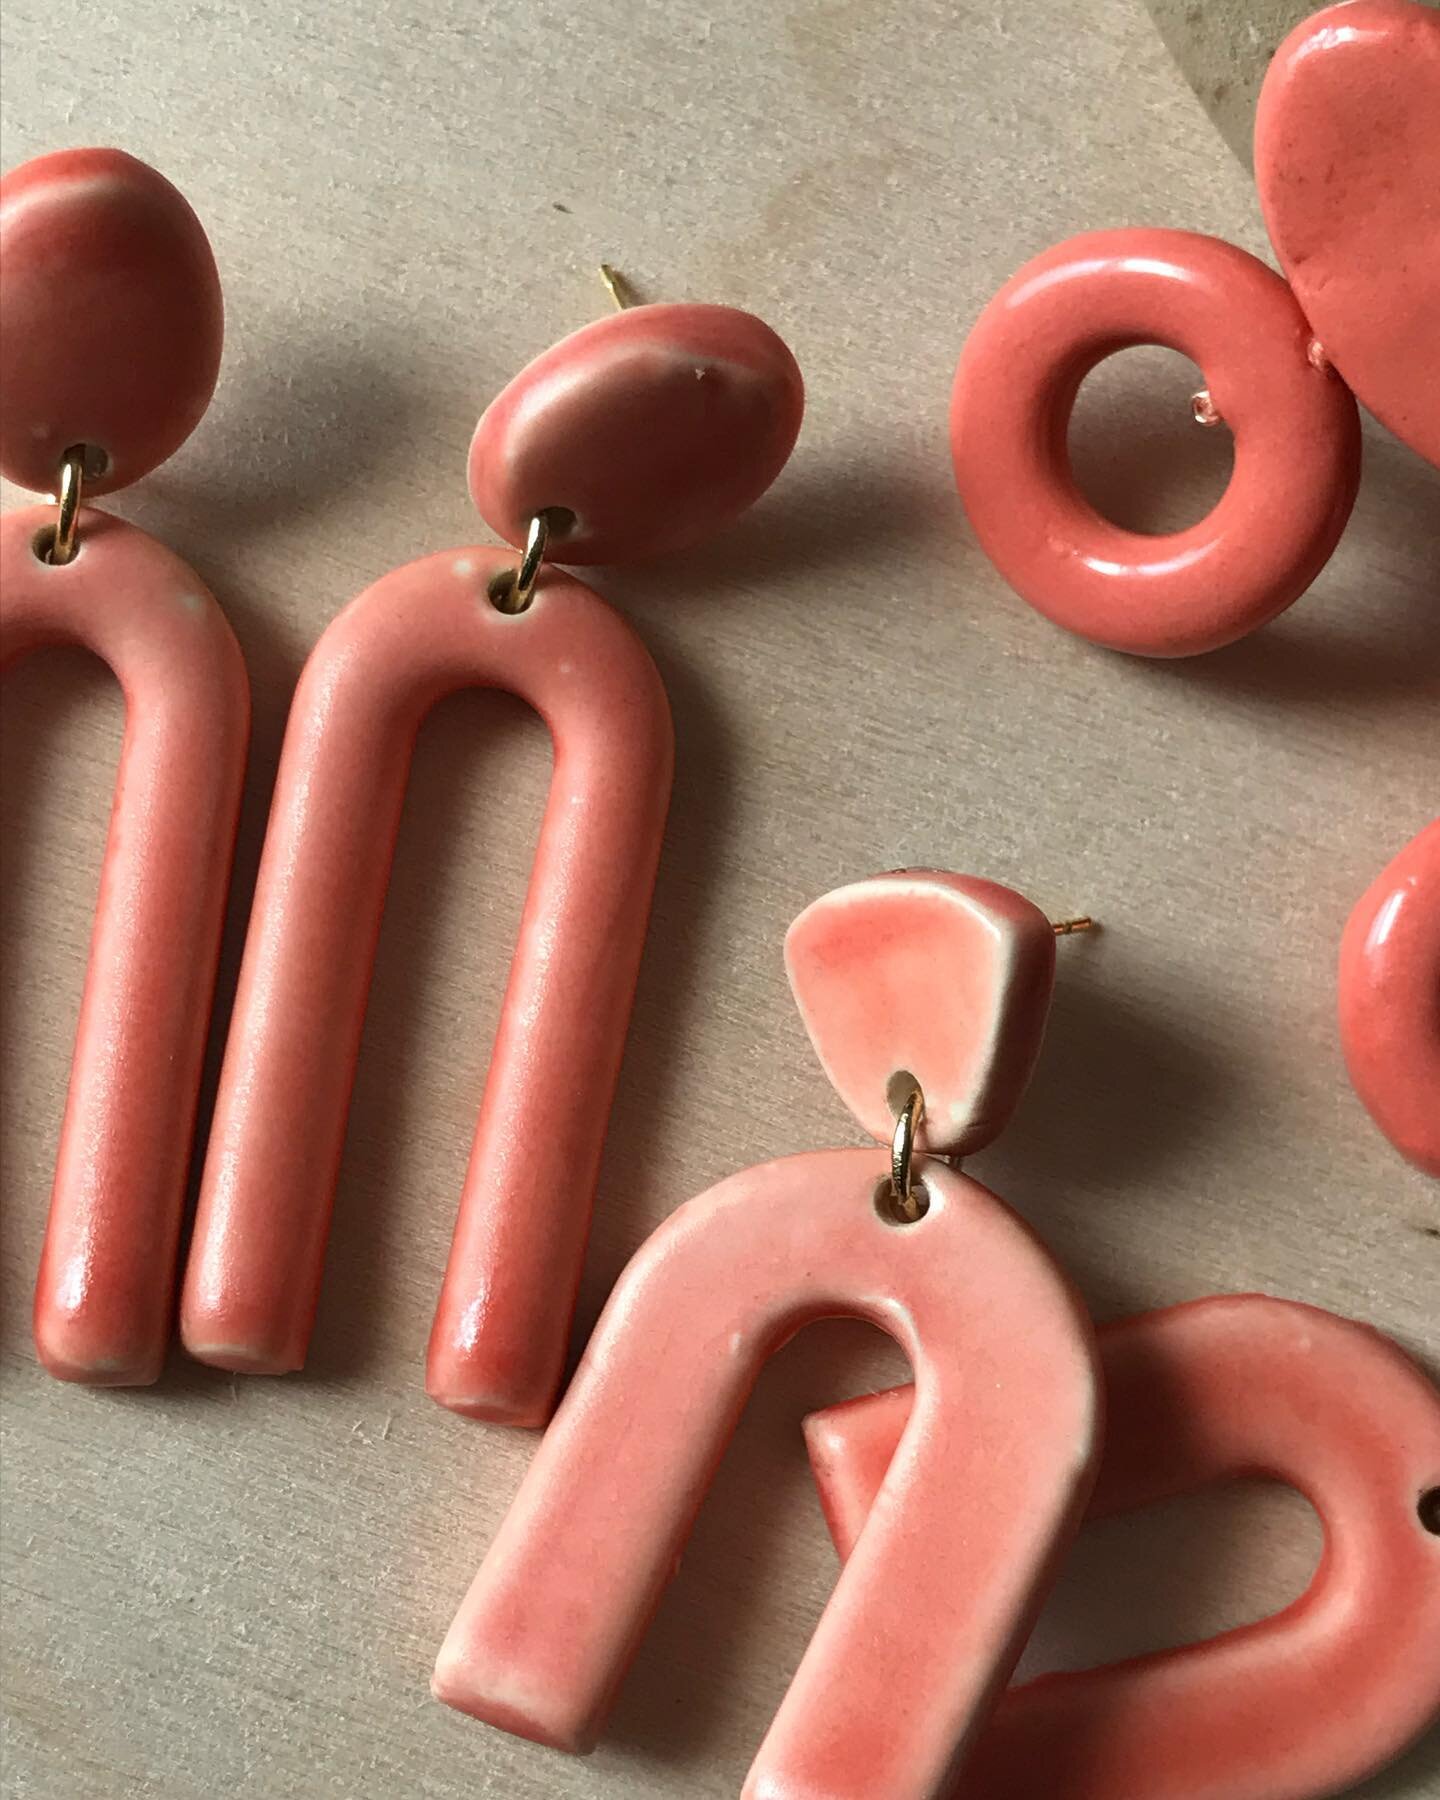 Holding onto summer colors as long as possible!! This coral has to be one of my favorites. .
.
.
.
.
.
.
.
.
#summervibes #summerjewelry #summeraccessories #fallishere #falliscoming #fallfashion #falljewelry #falltrends #ceramics #ceramicjewelry #cer